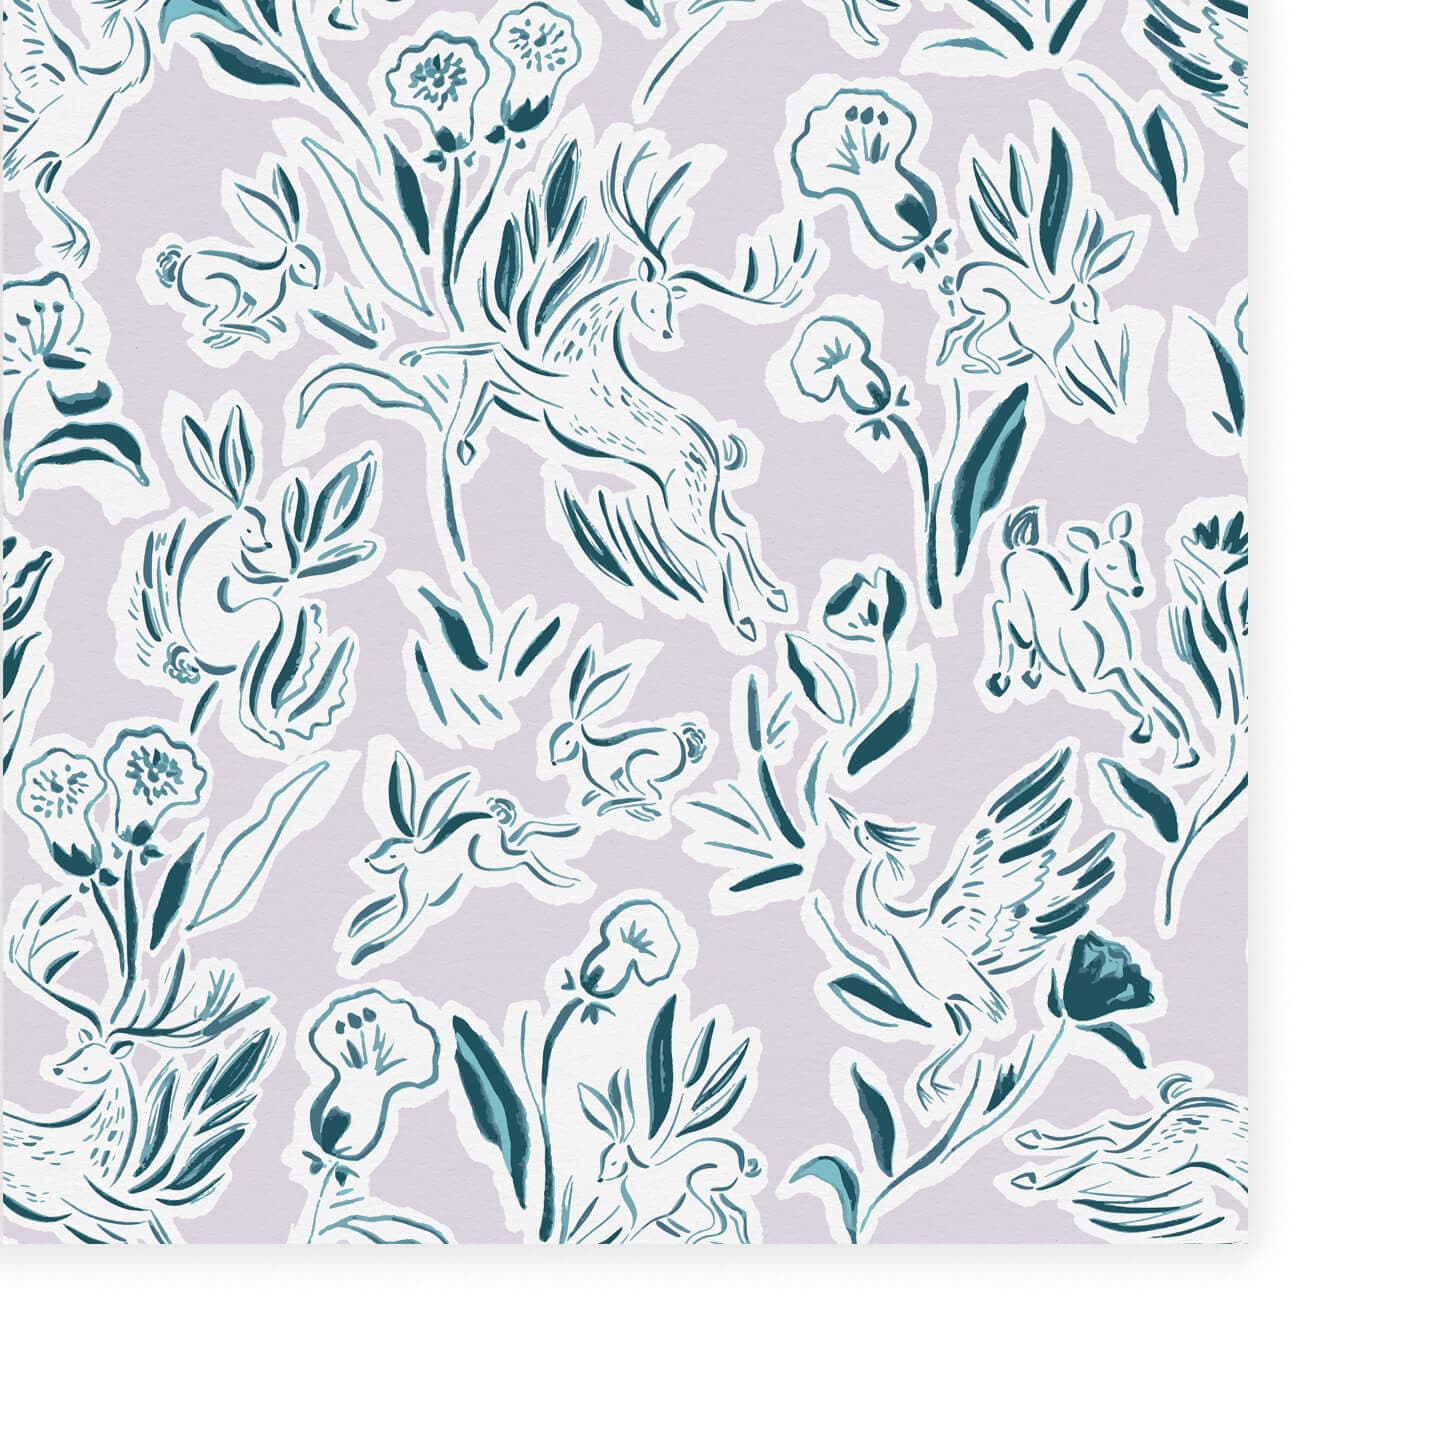 Wallpaper sample of teal deers, rabbits and flowers with a pastel purple background.